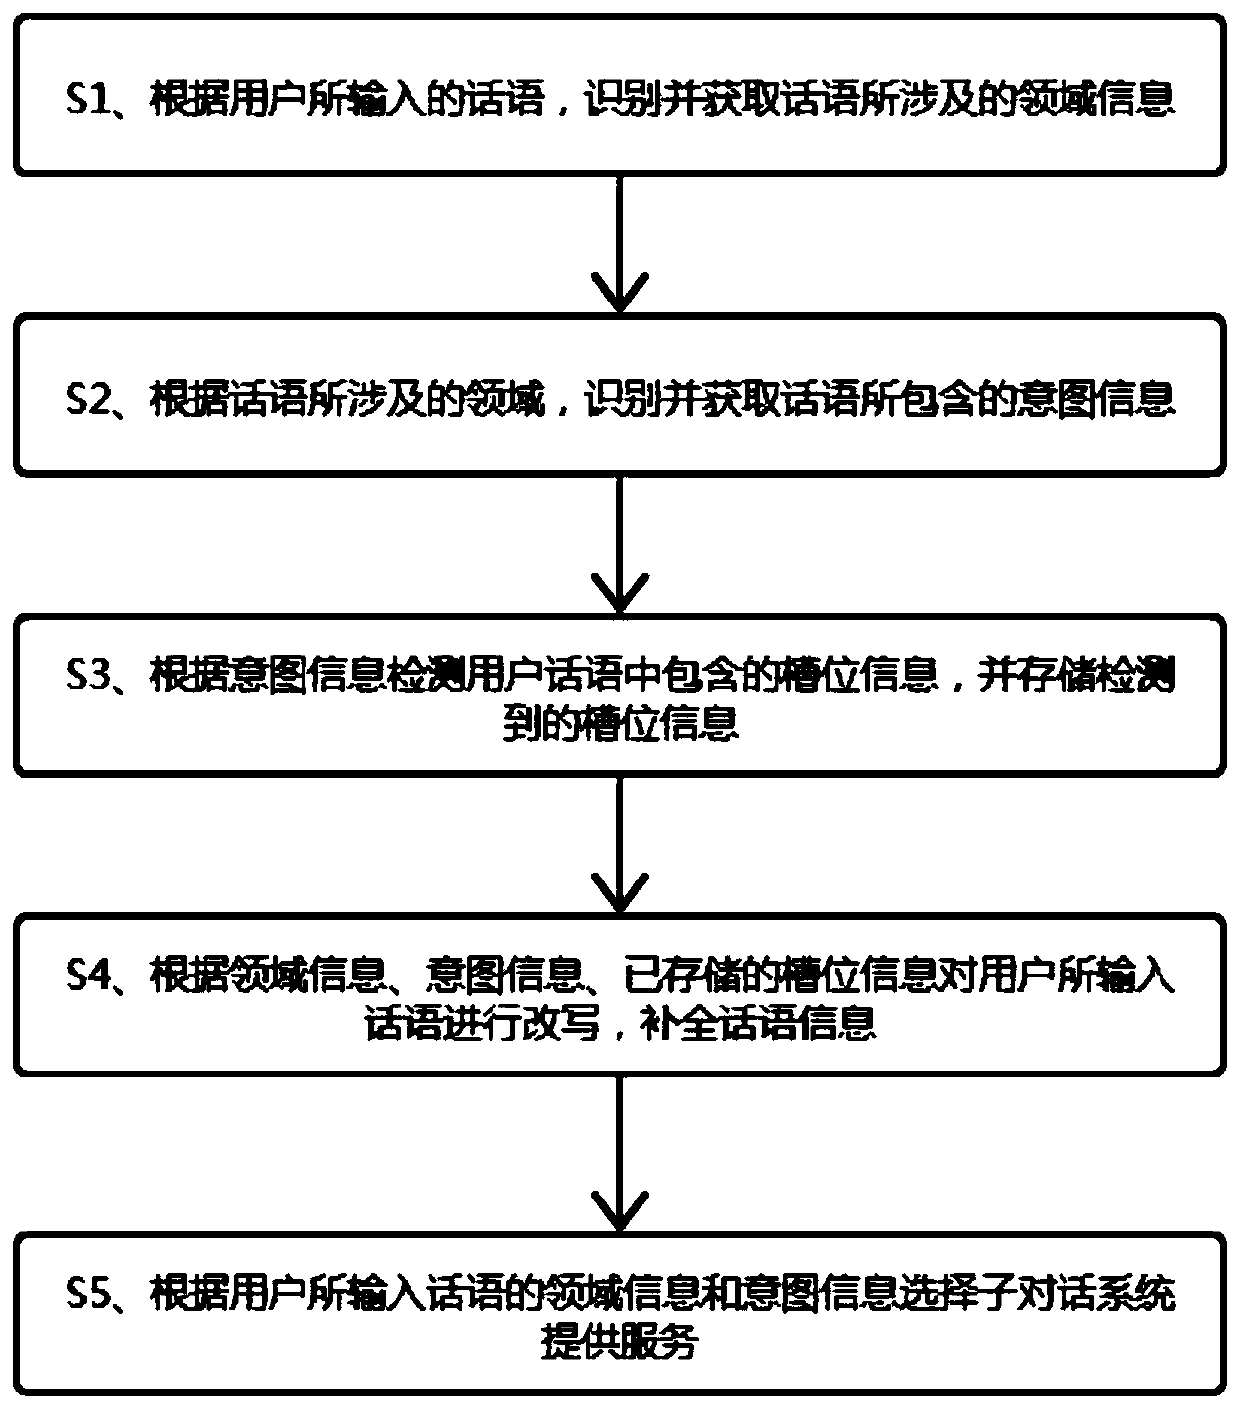 Spoken language understanding and rewriting method based on commercial dialogue system